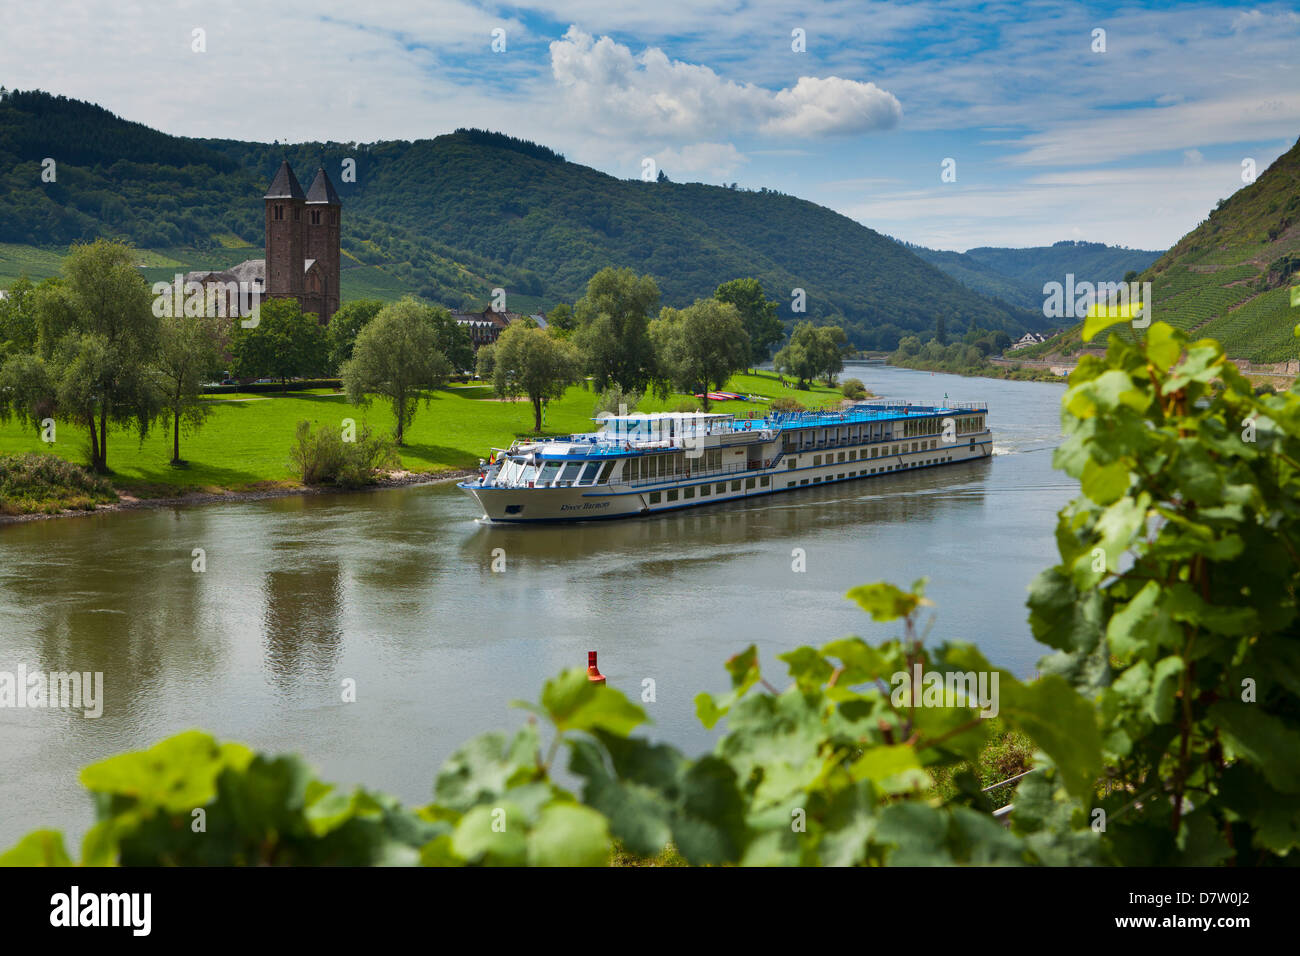 River cruise ship on the Moselle River, Germany Stock Photo